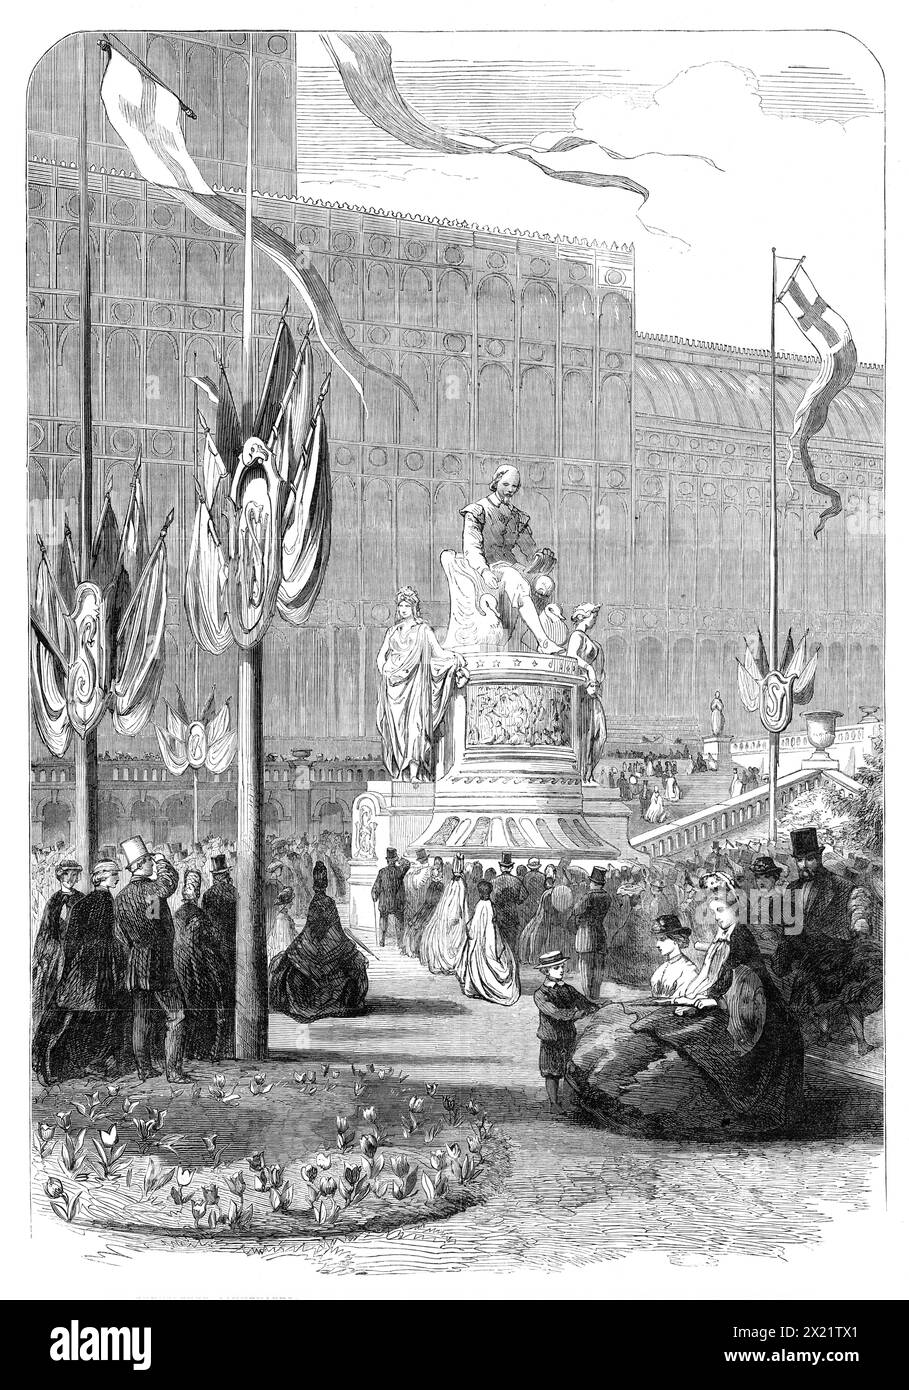 The Shakspeare Commemoration in London: monument of Shakspeare at the Crystal Palace, 1864. Event celebrating the tercentenary of Shakespeare's birth. 'The Crystal Palace Company made this Saturday a shilling day instead of a half-crown day, as usual. They have now opened to public view the exact representation of Shakspeare's house, of the same size as the original, modelled by Mr. E. T. Parris, in the central transept, with the Shakspeare Court, which contains models of the bust on his tomb and of the tombs of his wife and daughter. Our Engraving shows the monument, by Mr. Thomas, now erecte Stock Photo